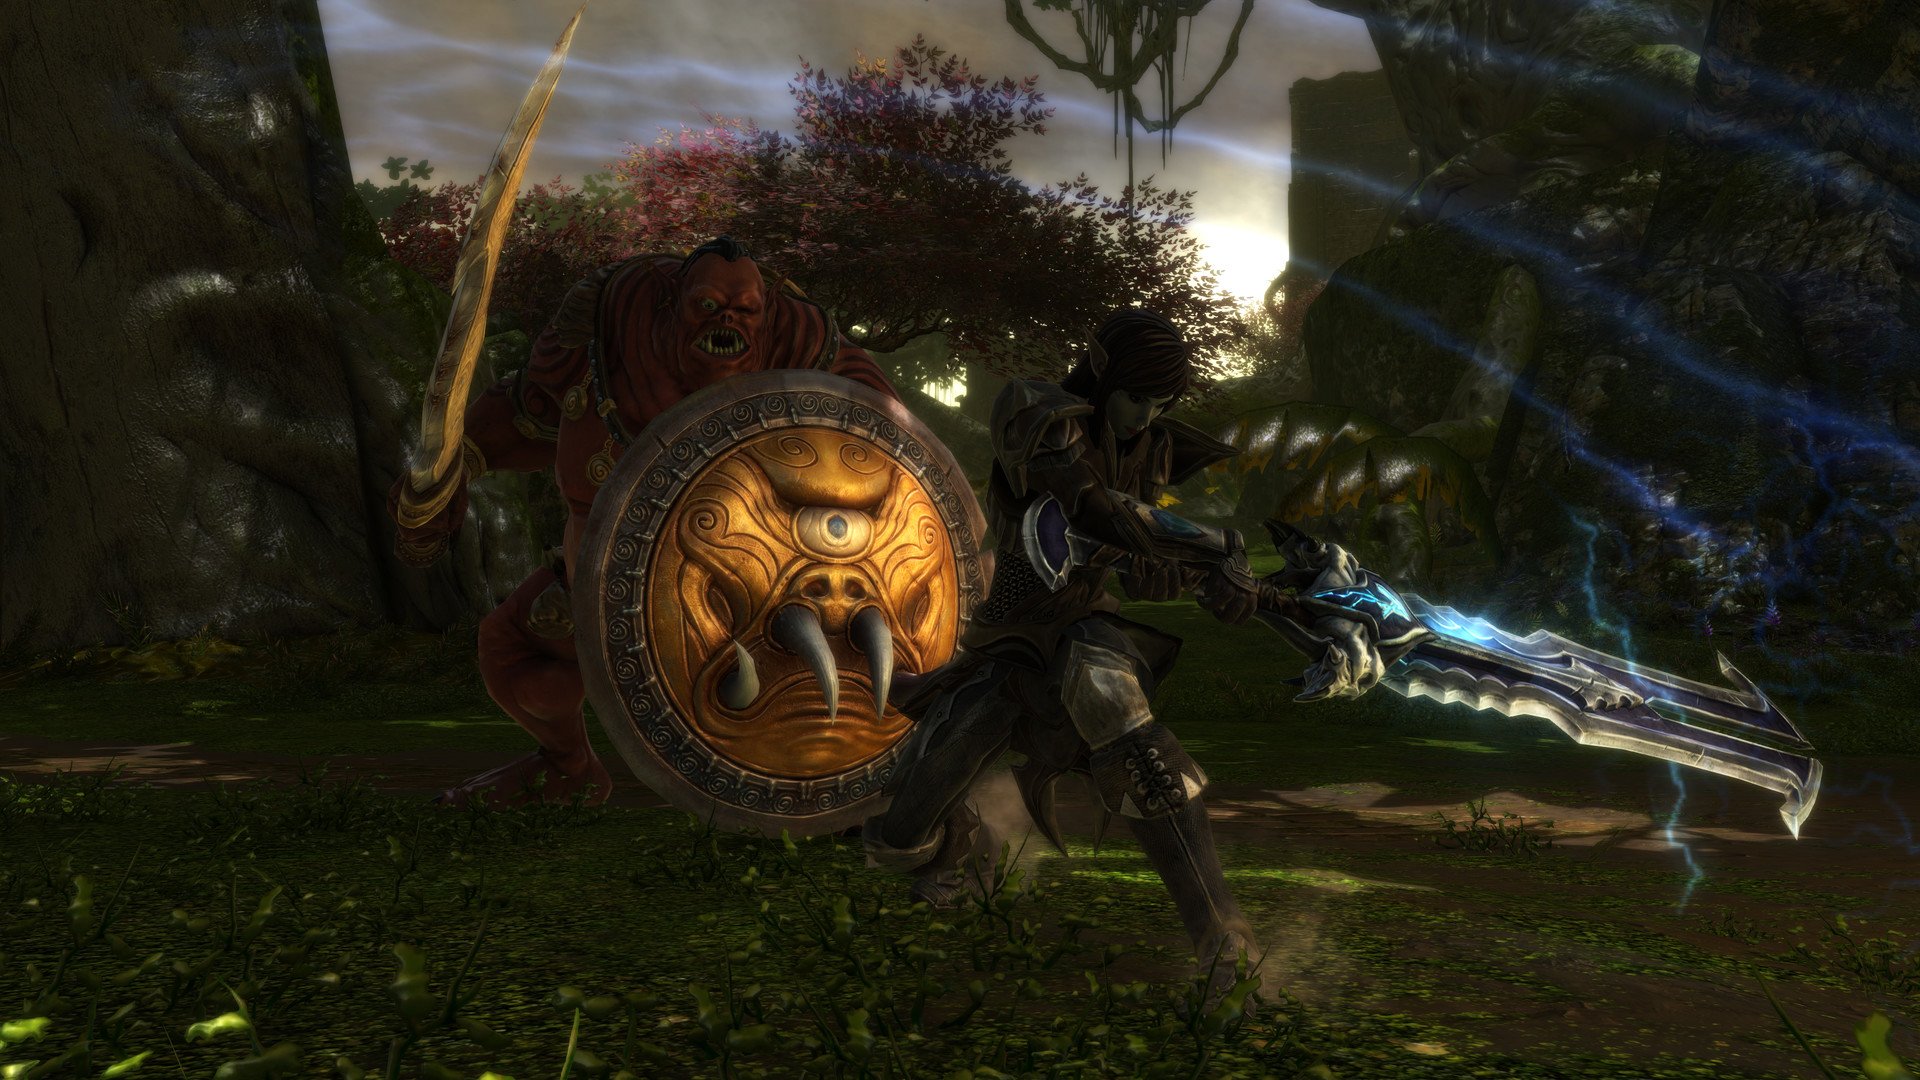 Kingdoms of Amalur Re-Reckoning PC requirements minimum recommended